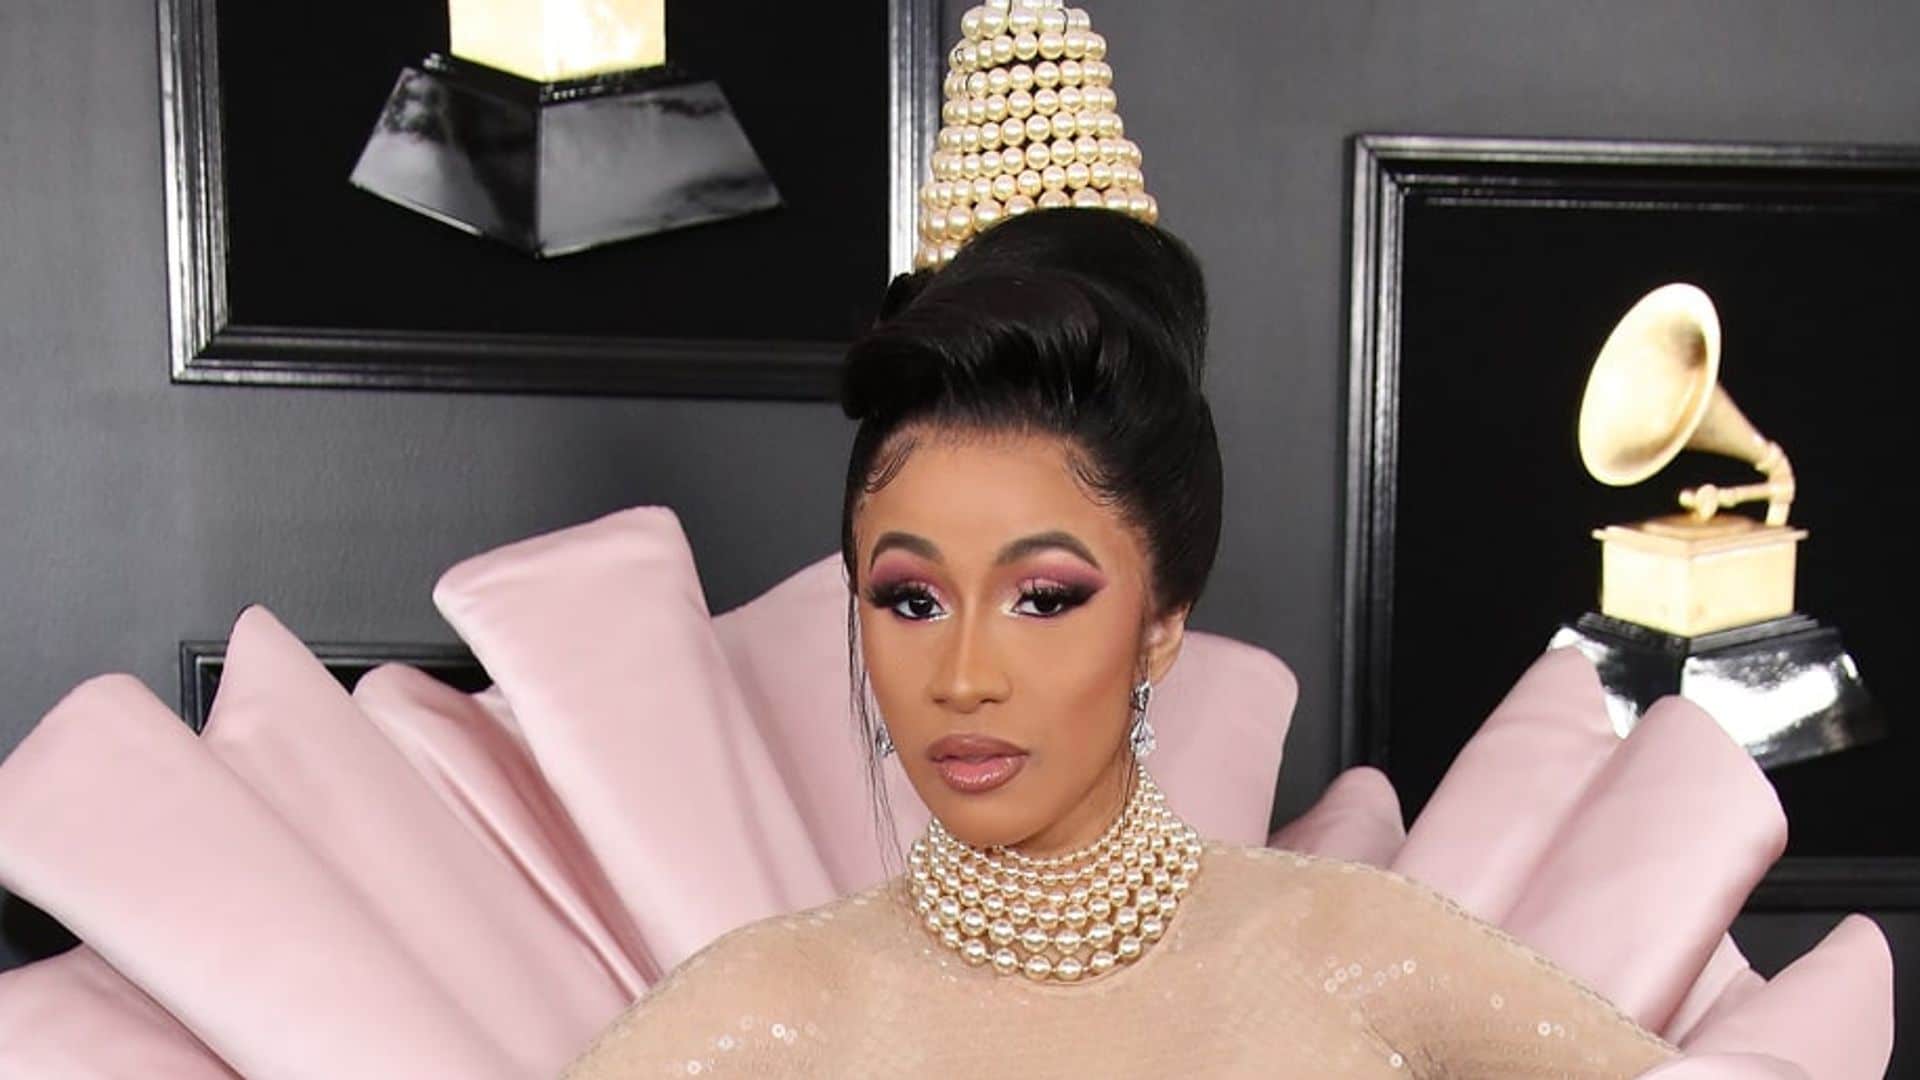 Cardi B leads the 2019 Billboard Music Awards with 21 nominations